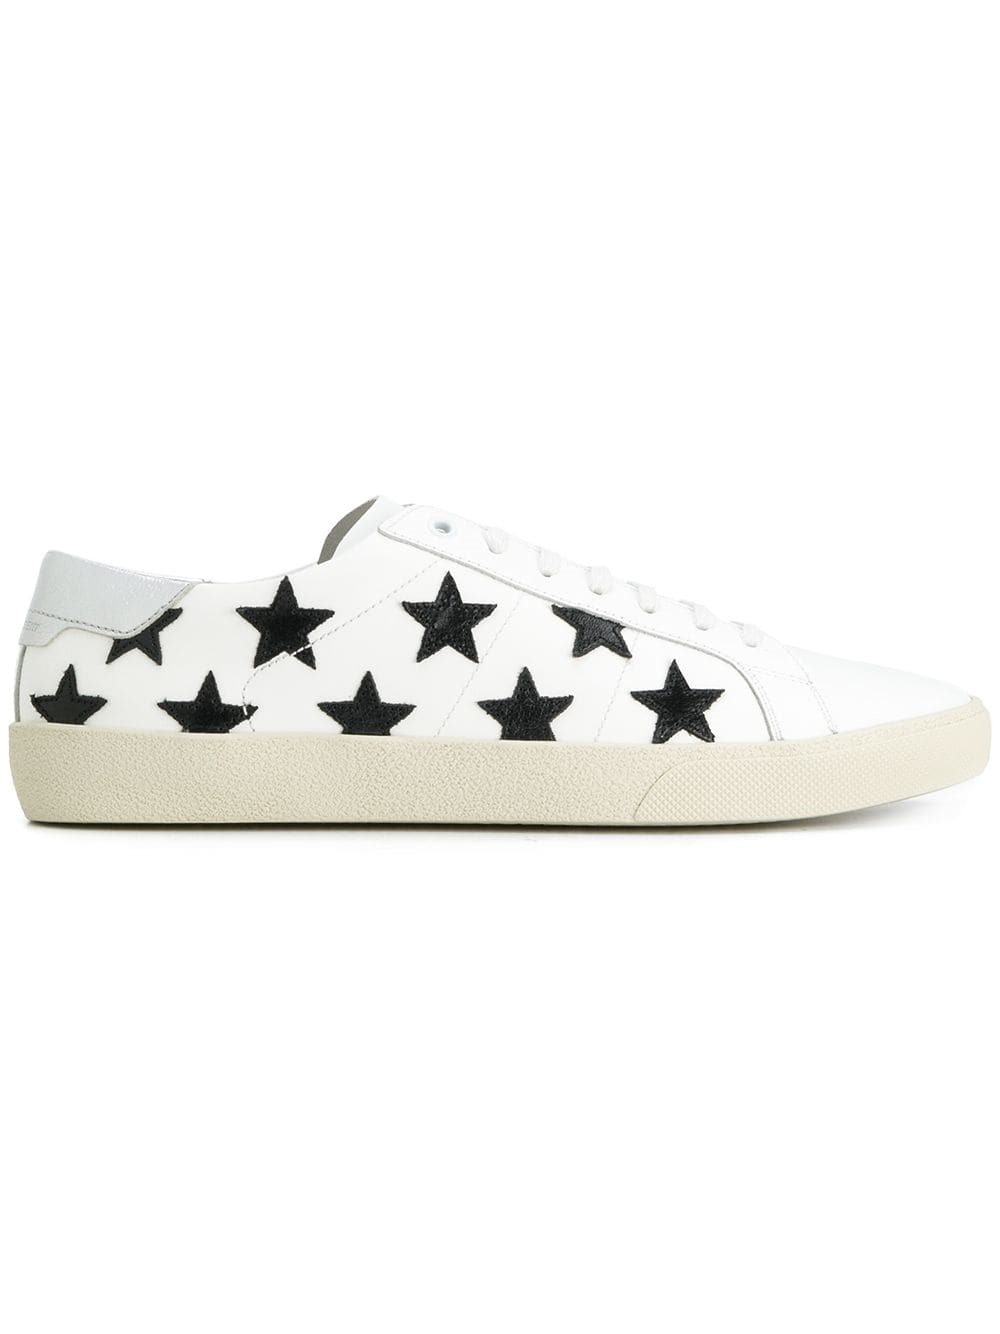 saint laurent STAR SNEAKERS available 